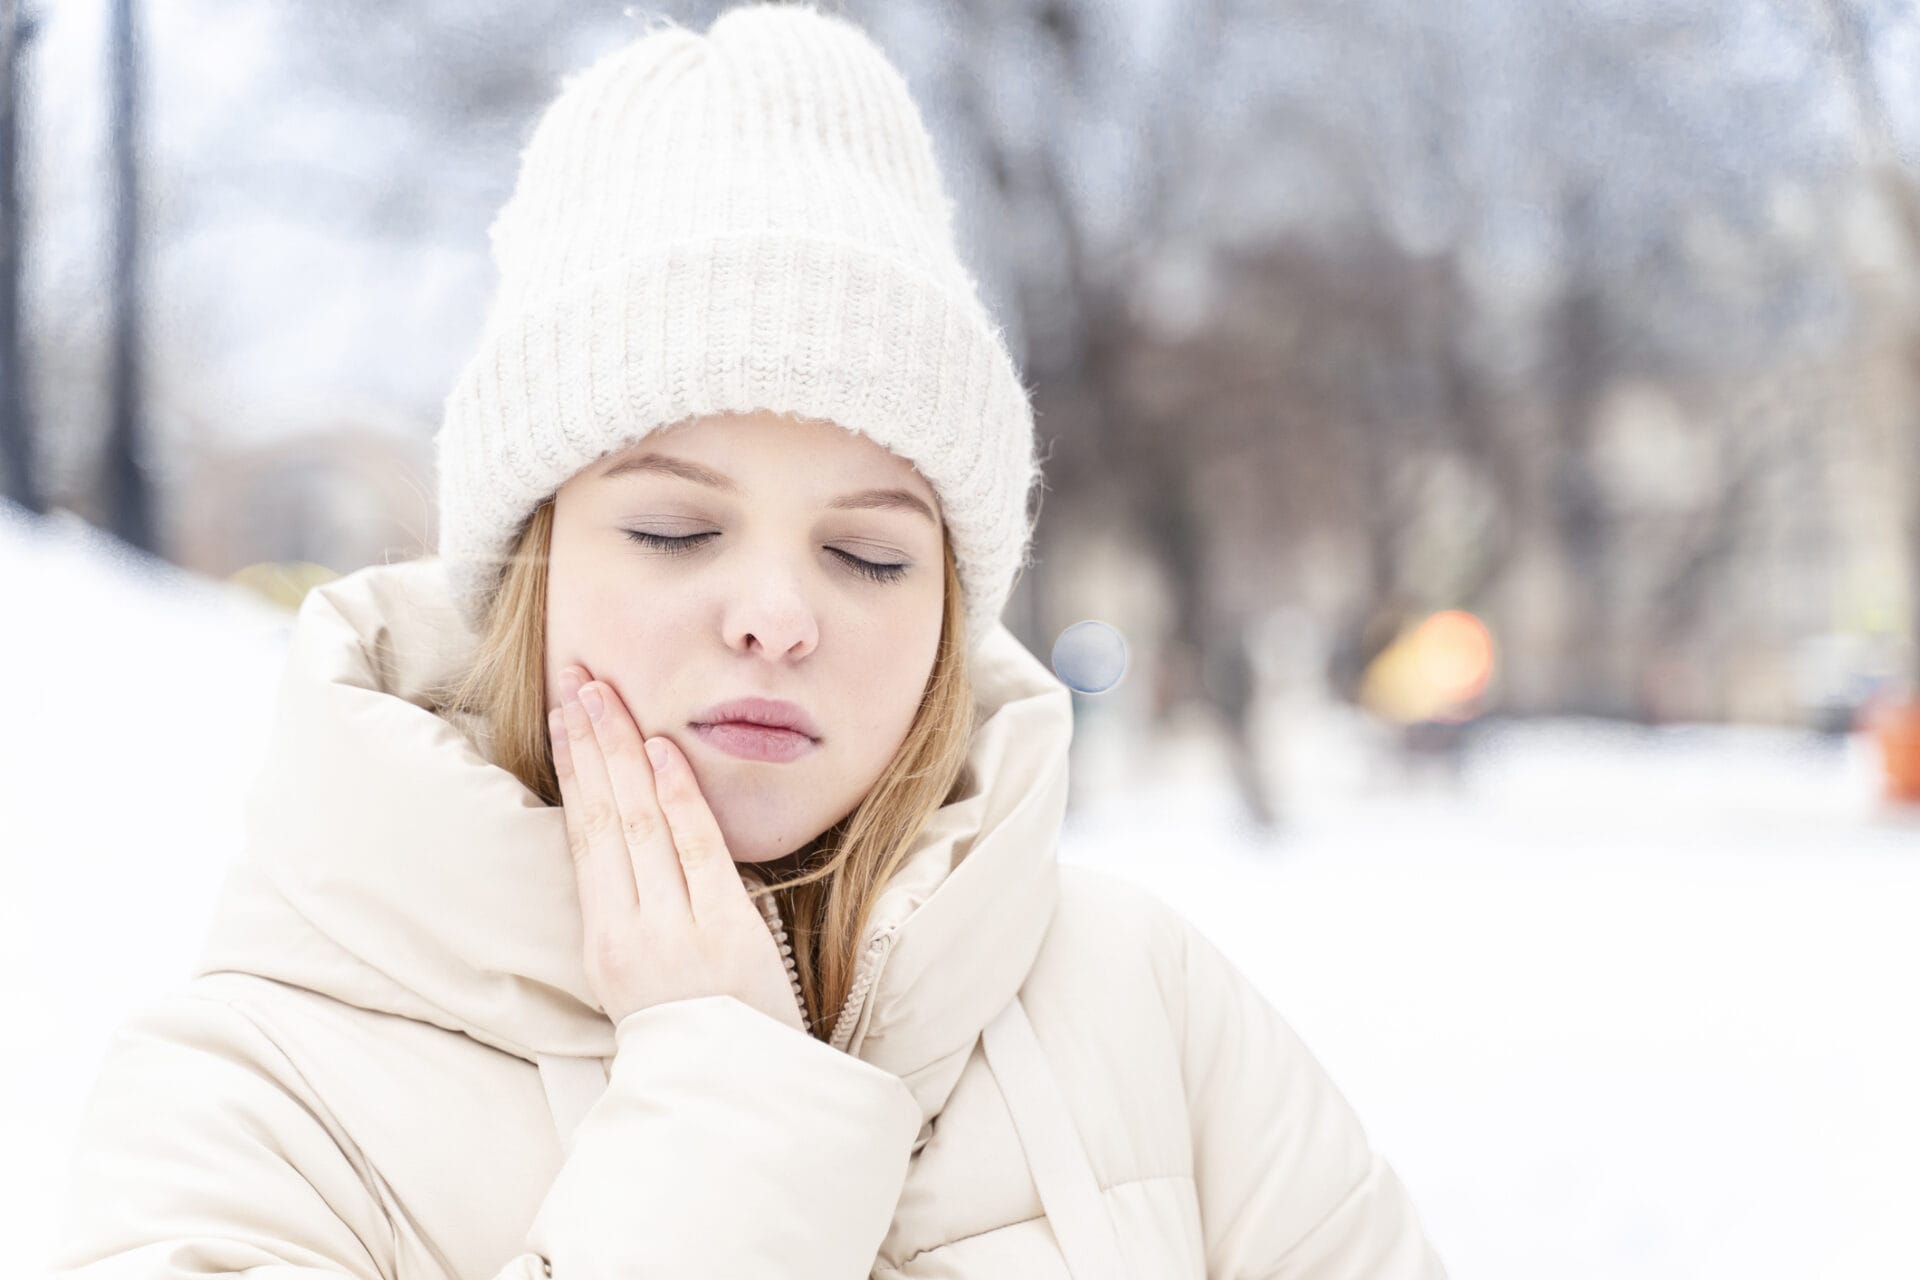 sensitive teeth in cold weather